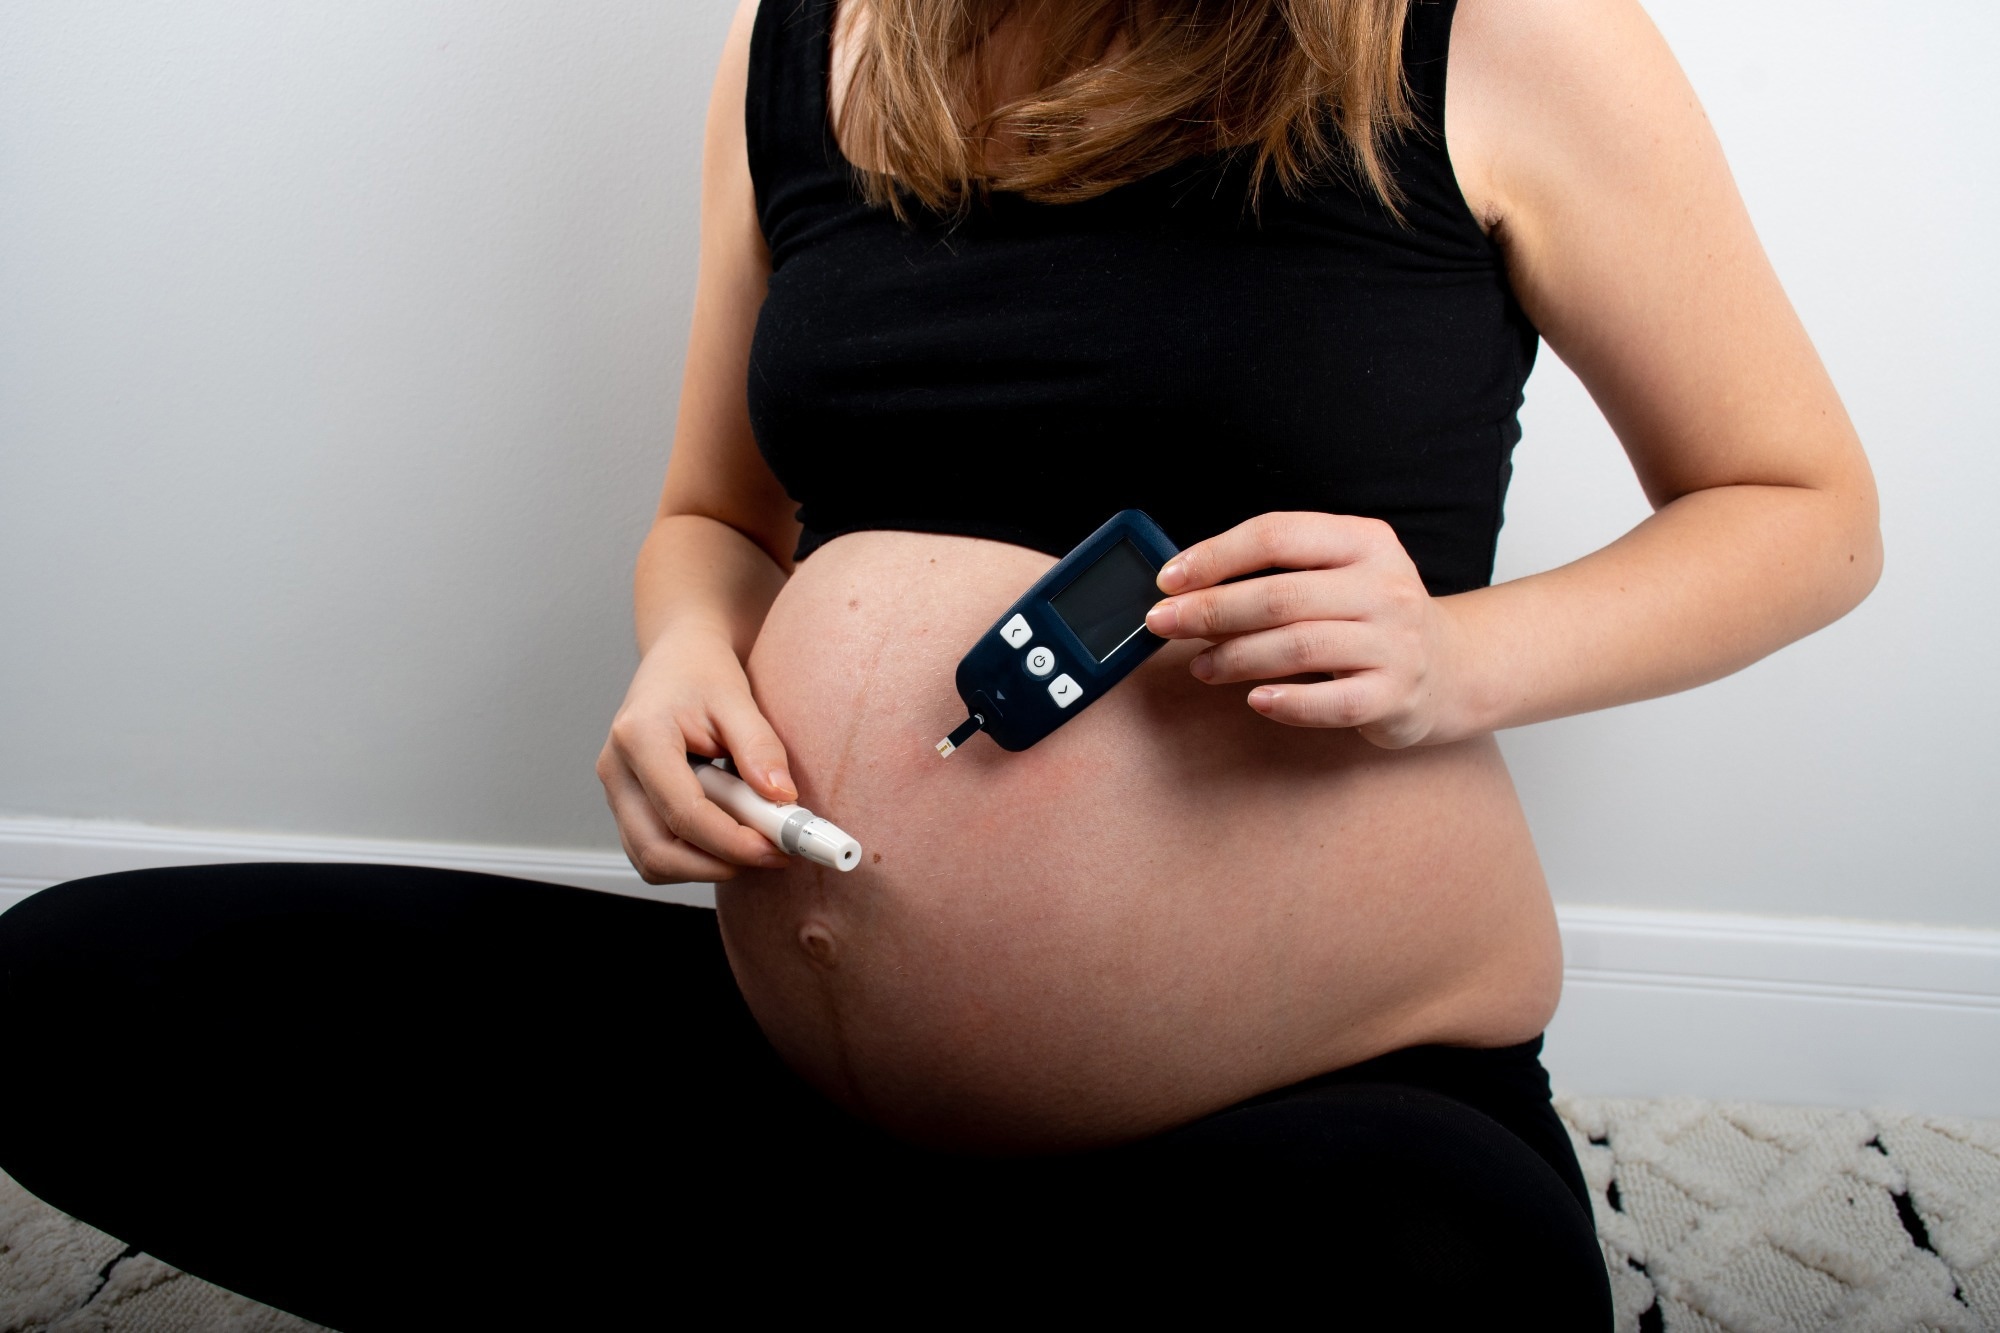 How maternal obesity and gestational diabetes can impact DNA methylation in infants